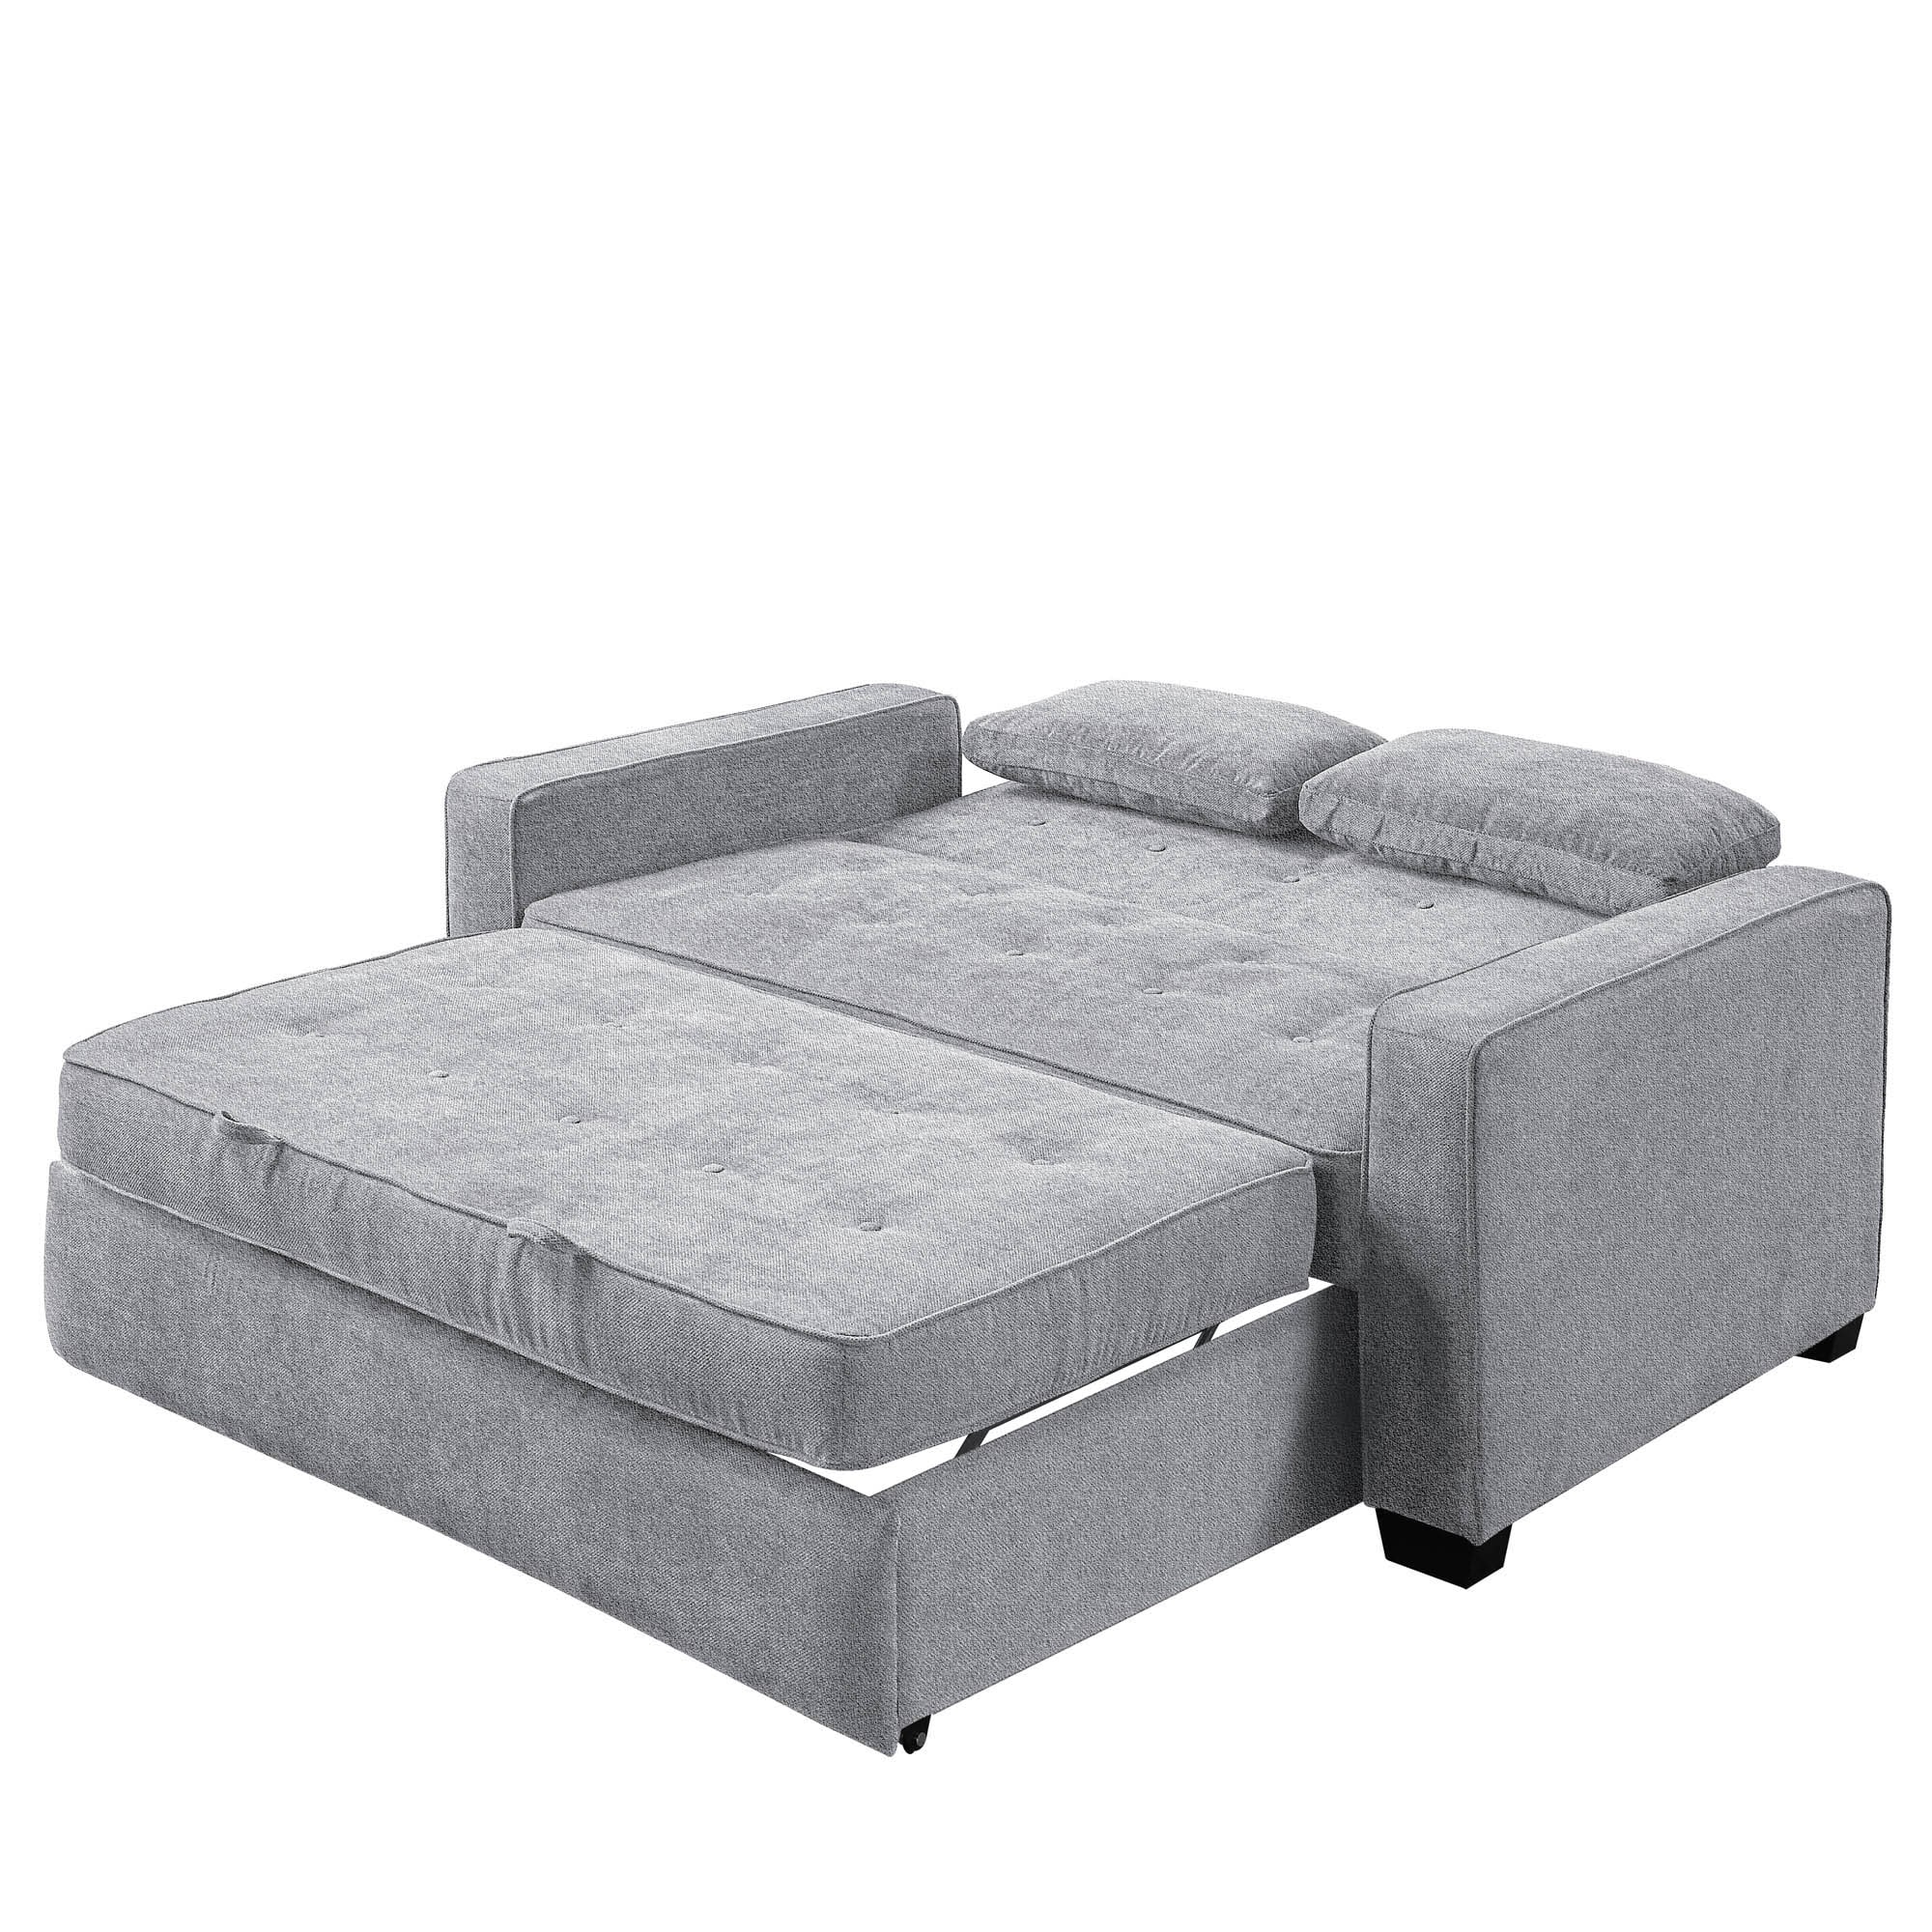 Sofas Sofa the Light Arya Serta Polyester/Blend 2-seater in 66.5-in Modern Couches, Grey Loveseats department at &